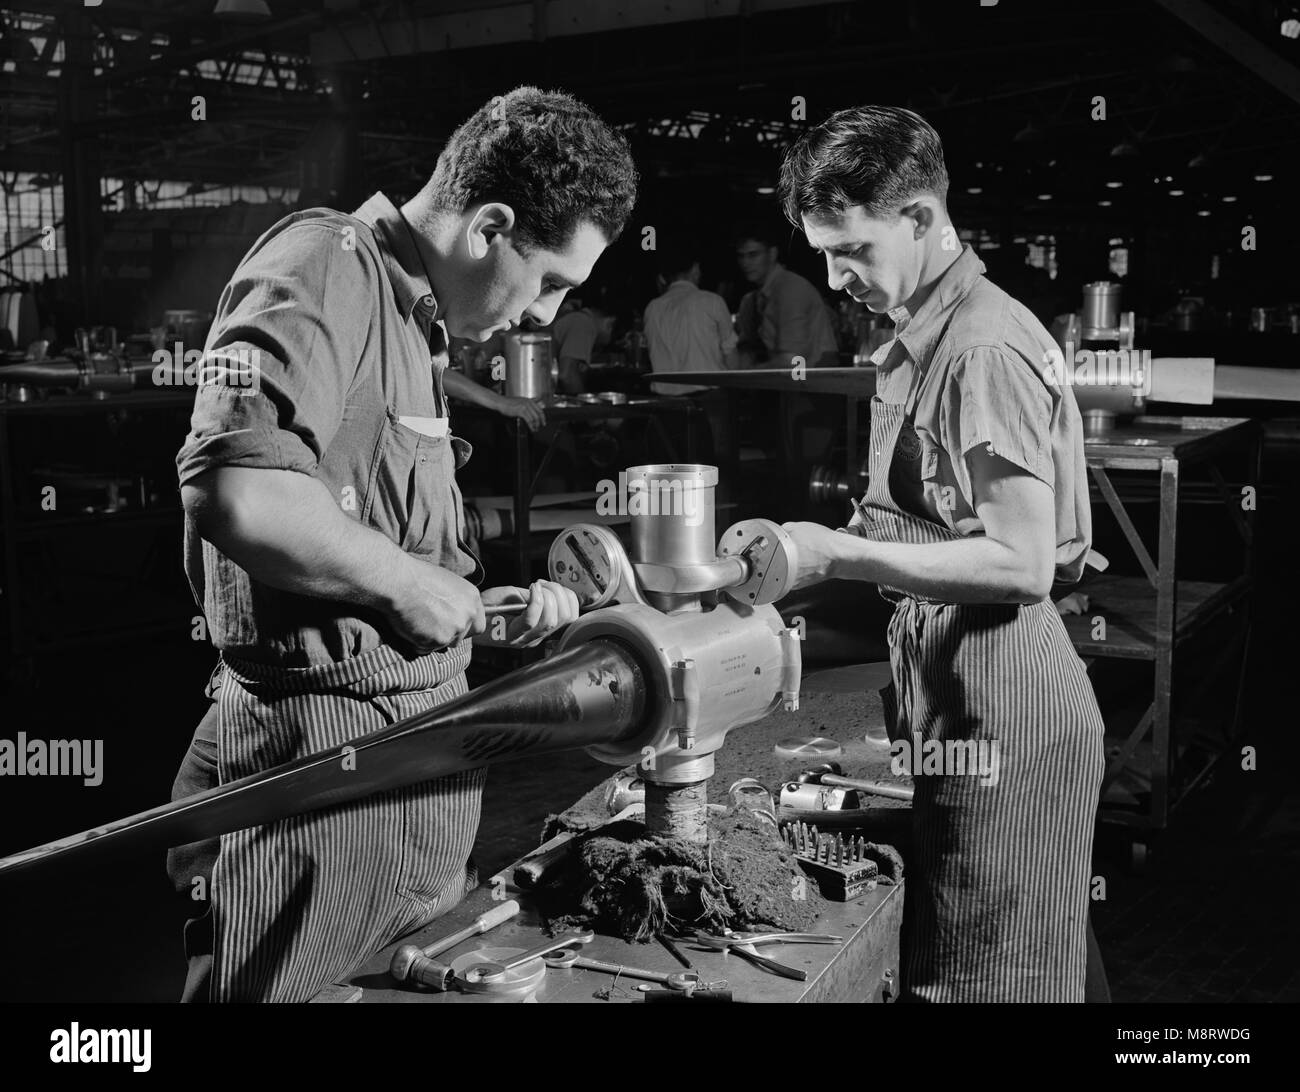 Leo Diana and George O'Meara working Assembling Propeller Blade for Military Aircraft at Manufacturing Plant, Hartford, Connecticut, USA, Andreas Feininger for Office of War Information, June 1942 Stock Photo